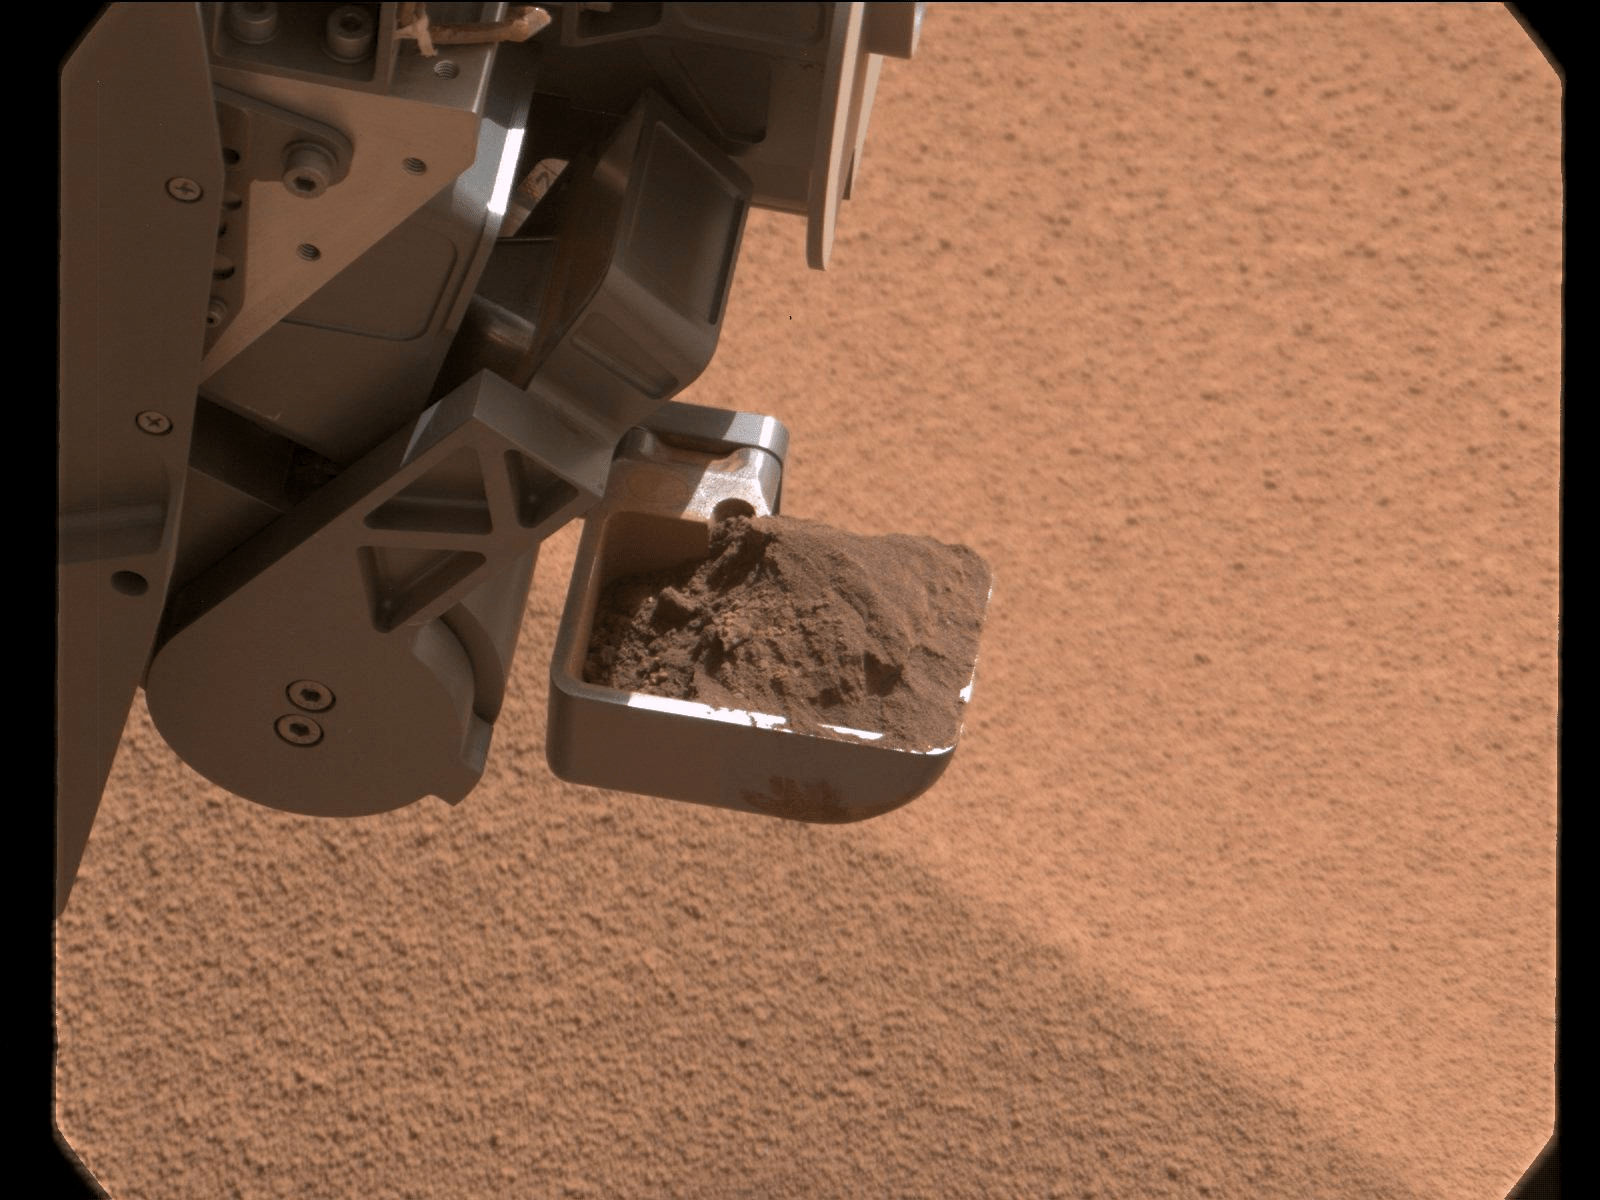 Closeup of Mars rover scooping up a sample of surface material